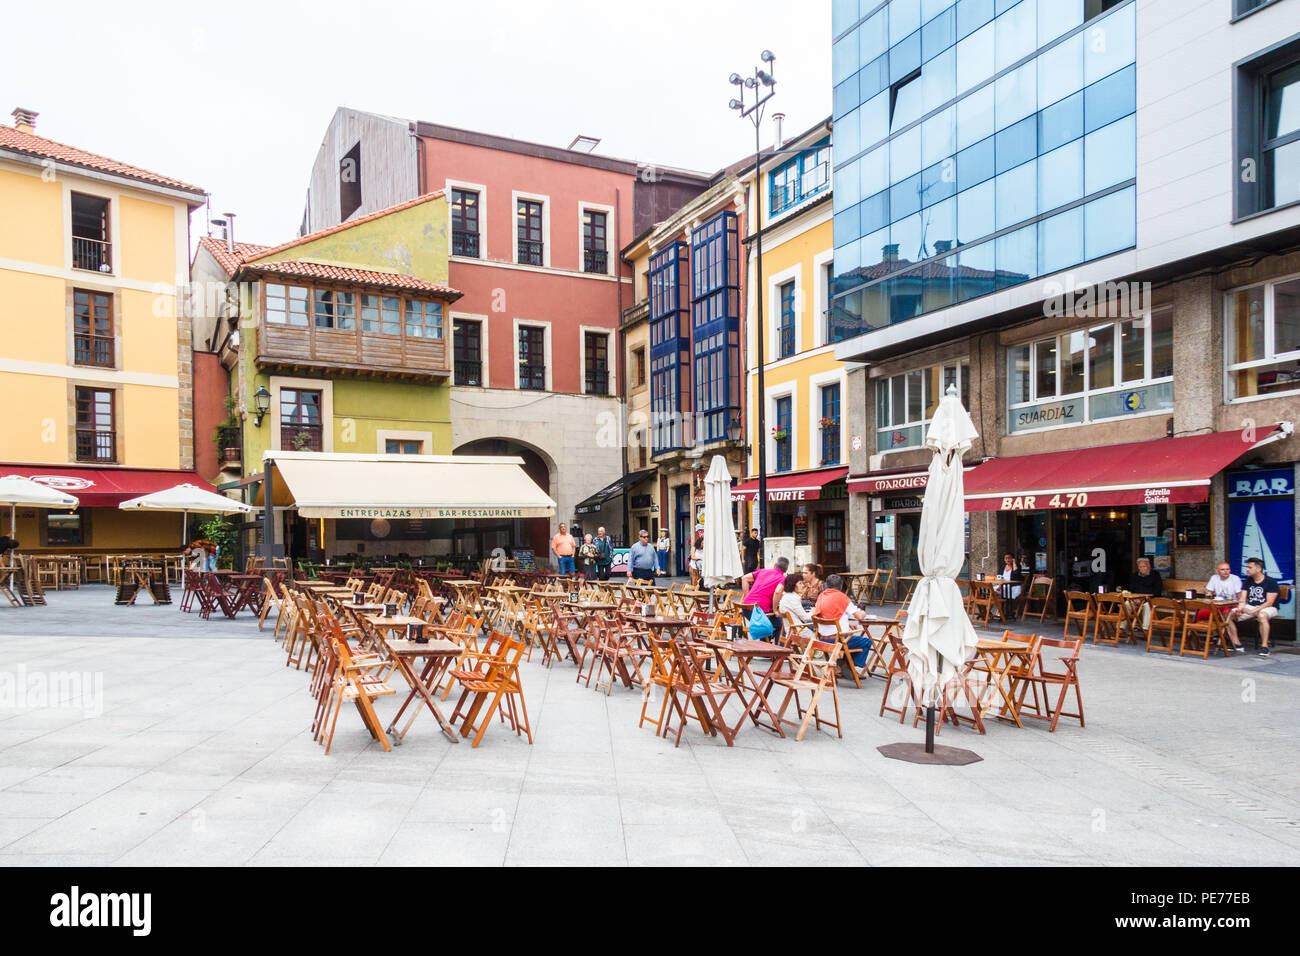 Gijon, Spain - 6th July 2018: Typical square with bars. Al fresco eating and drinking is popular all over Spain. Stock Photo